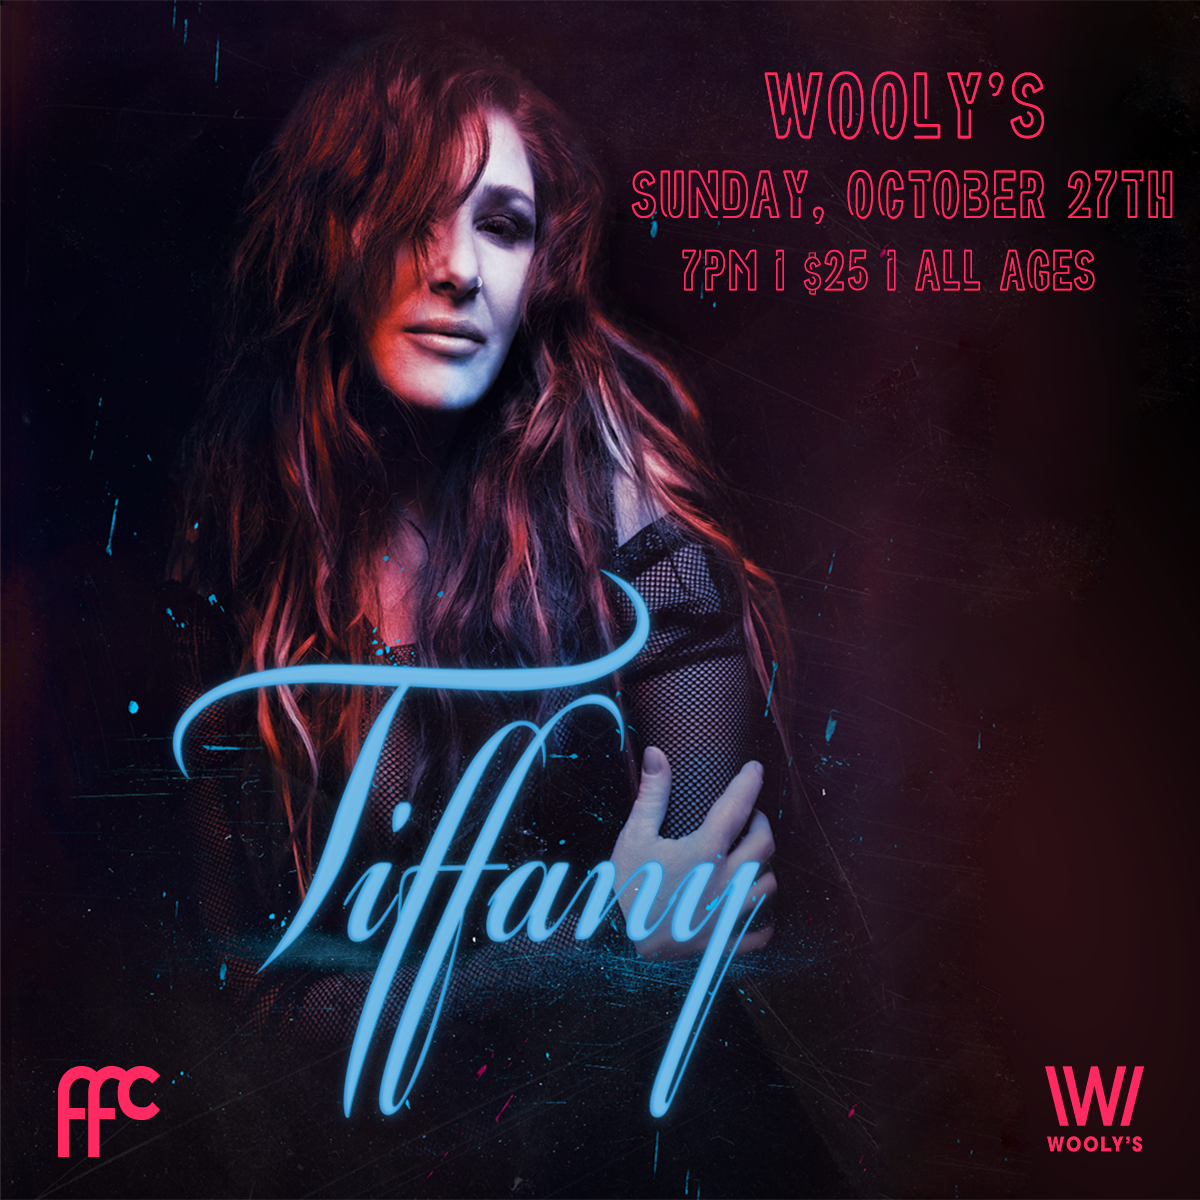 ’80s Pop Icon Tiffany Playing Show at Wooly’s